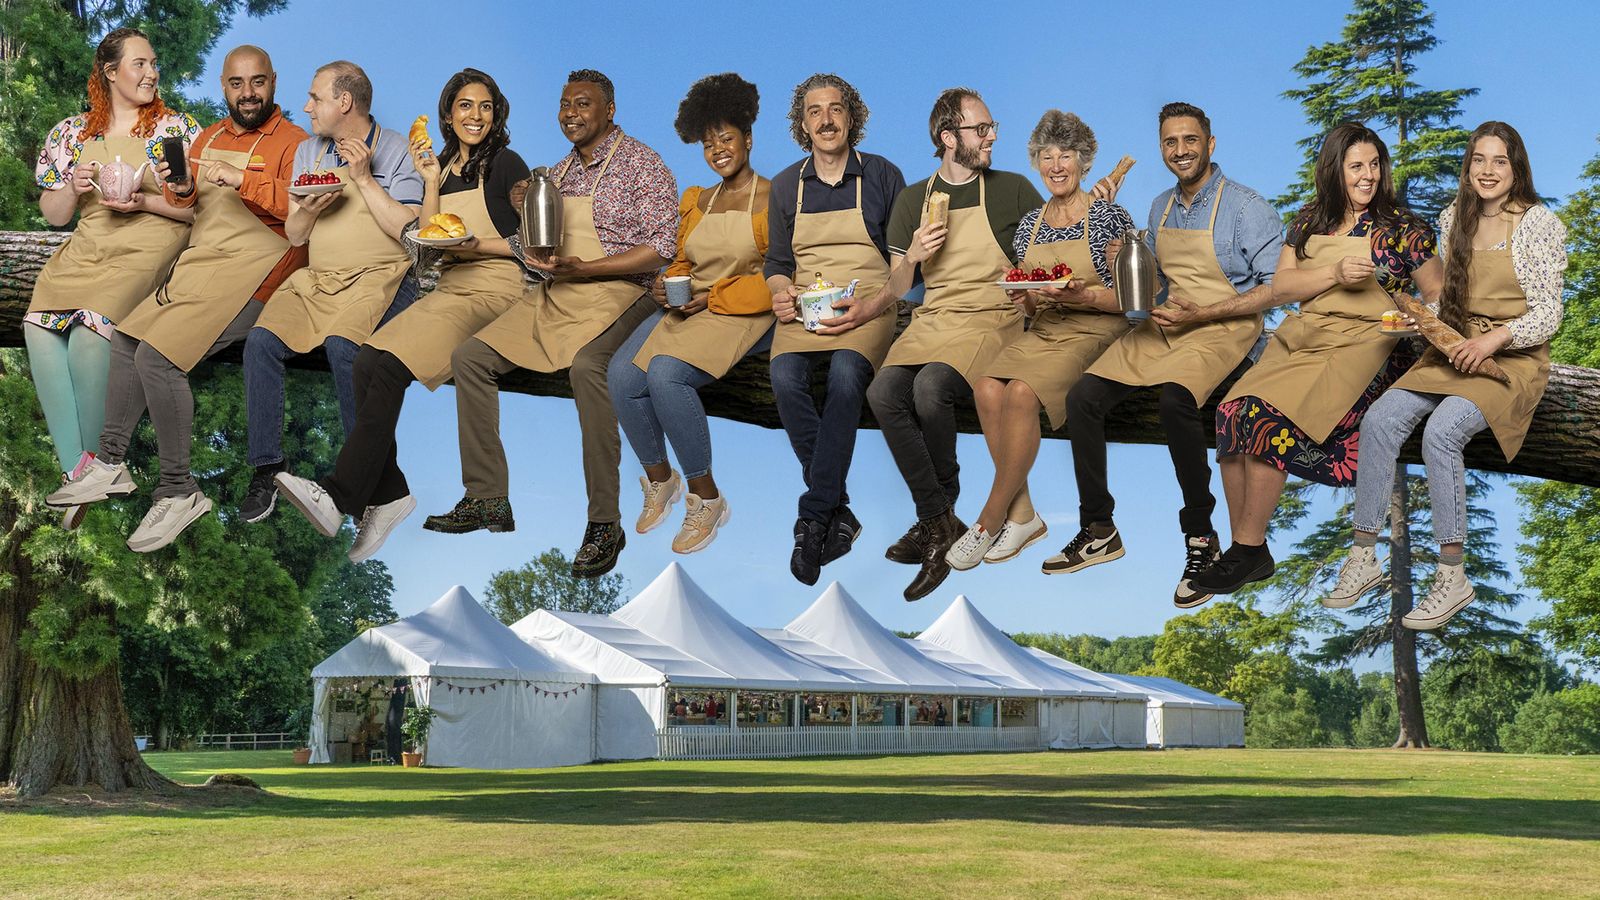 Great British Bake Off winner ‘speechless’ after being crowned 2021 champion